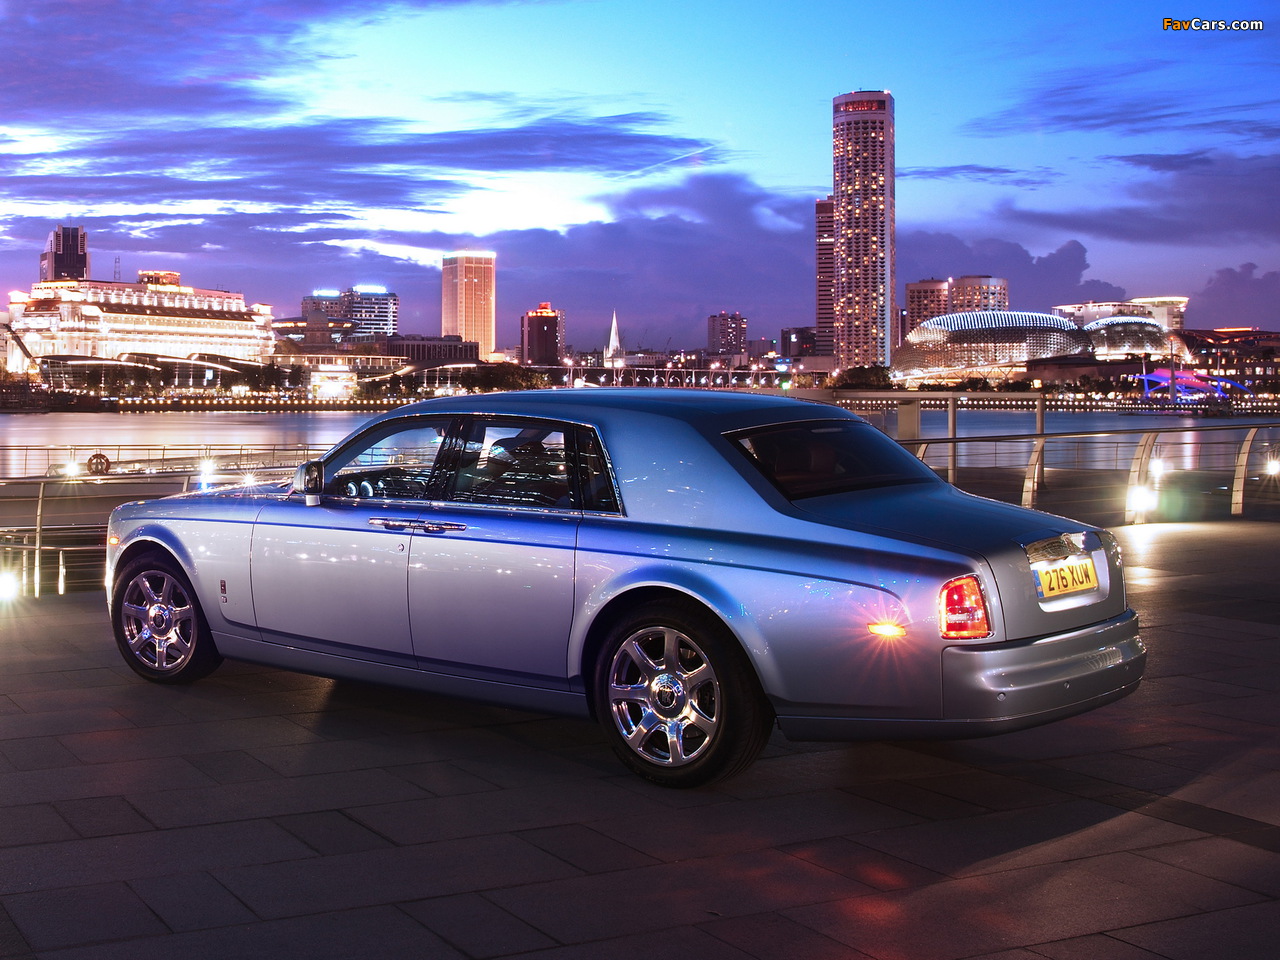 Rolls-Royce 102EX Electric Concept 2011 pictures (1280 x 960)